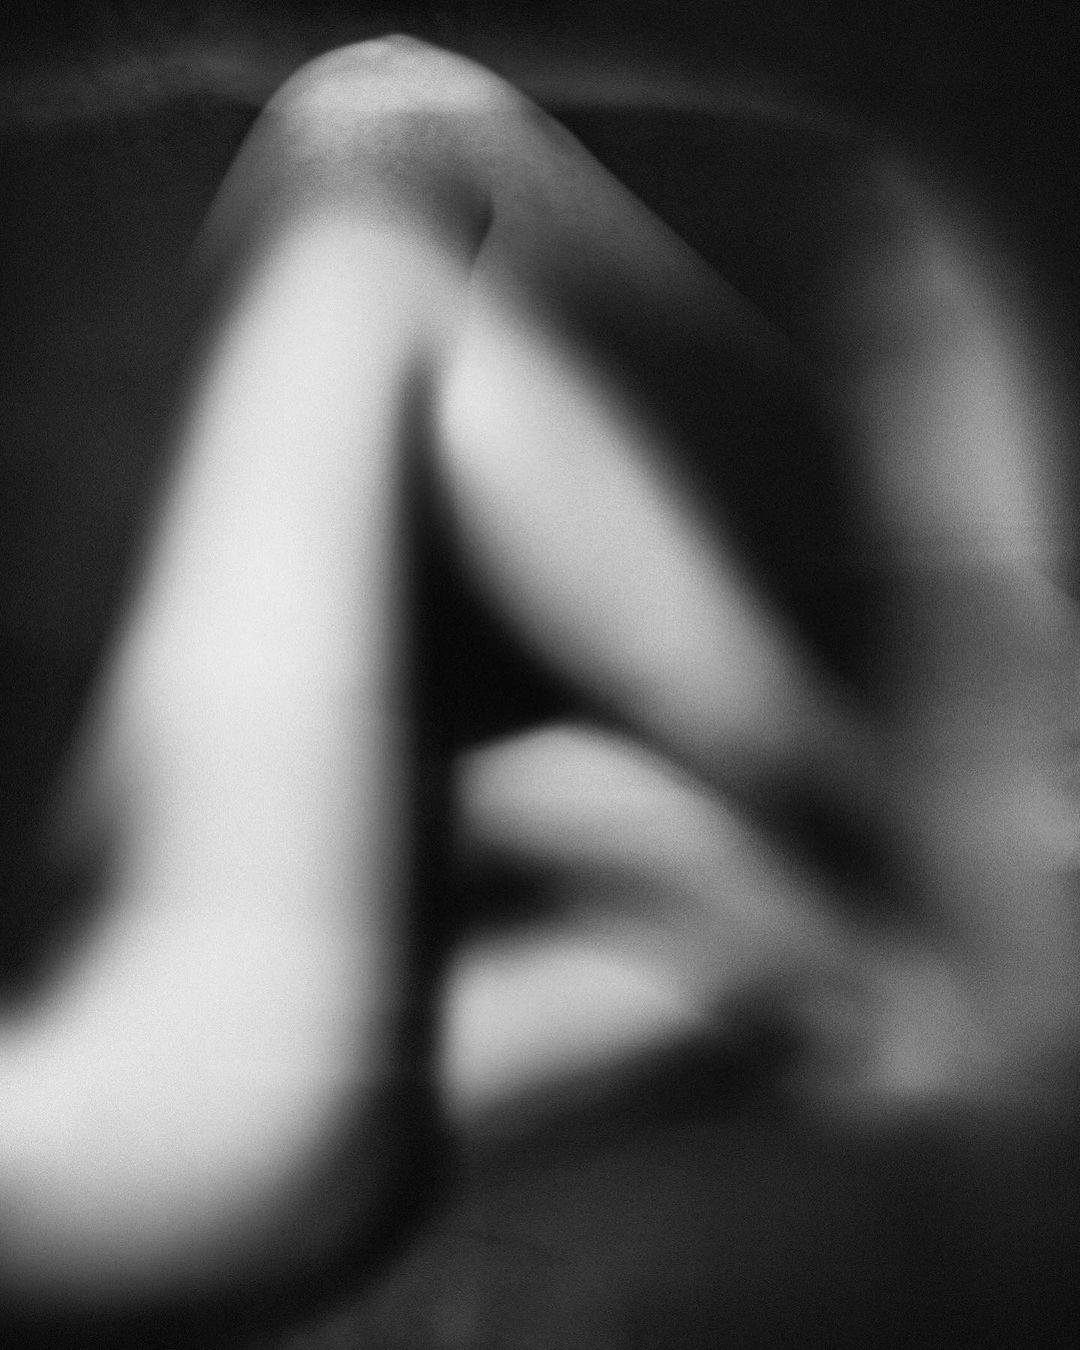 class="content__text"
 Nude, 2022

 #omarcruzphoto #photographer #artist #abstract #shapes #legs #photography #artcollecting #artgalleries #zomamaco #portraits #woman #fashion #bwphotography #artprocess #bwphotography #bwphoto 
 